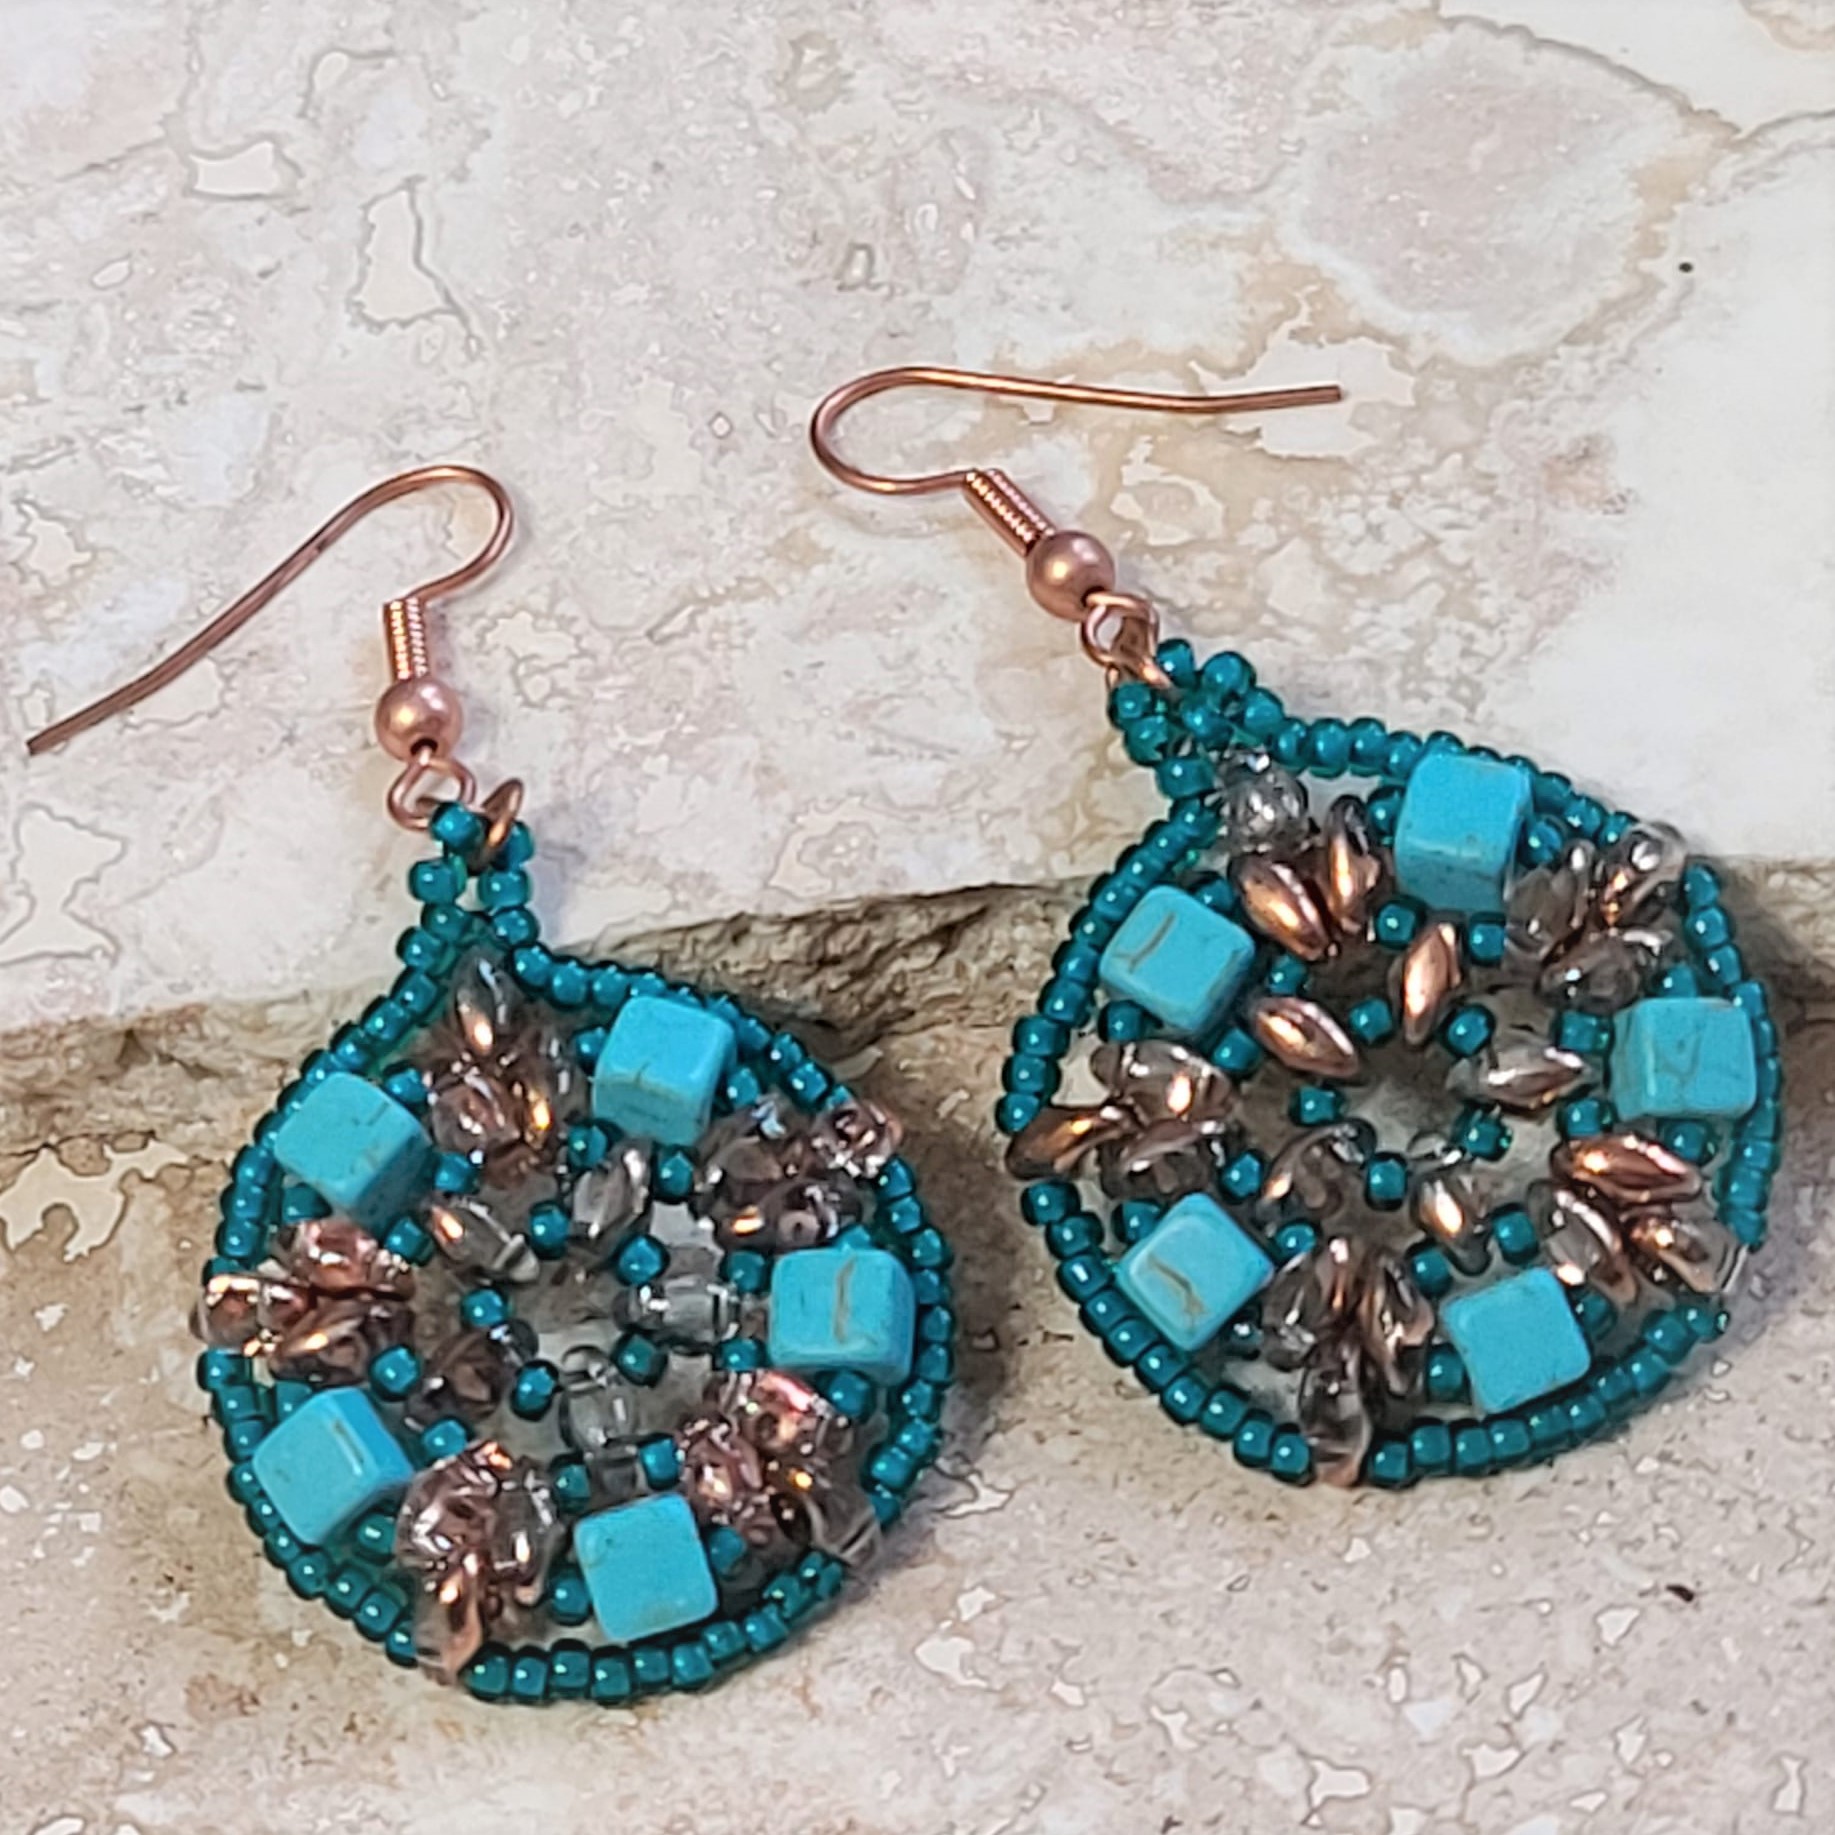 Turquoise Gemstone Medallion Handstitched Earrings